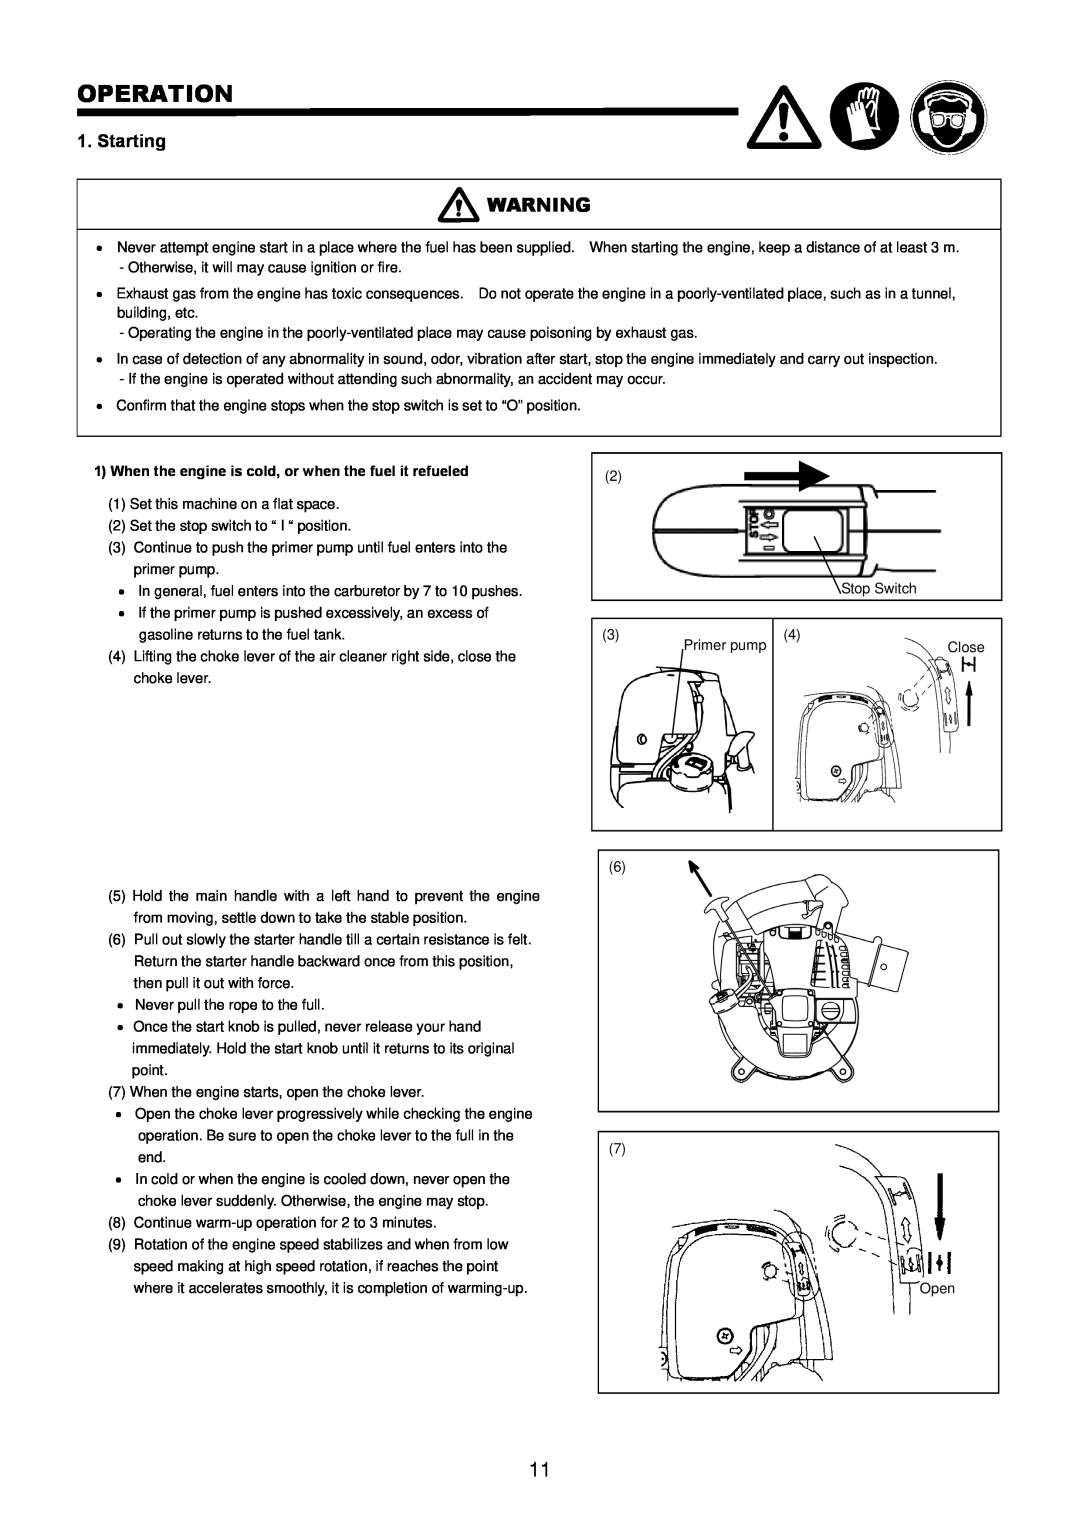 Dolmar PB-250.4 instruction manual Operation, Starting, When the engine is cold, or when the fuel it refueled 